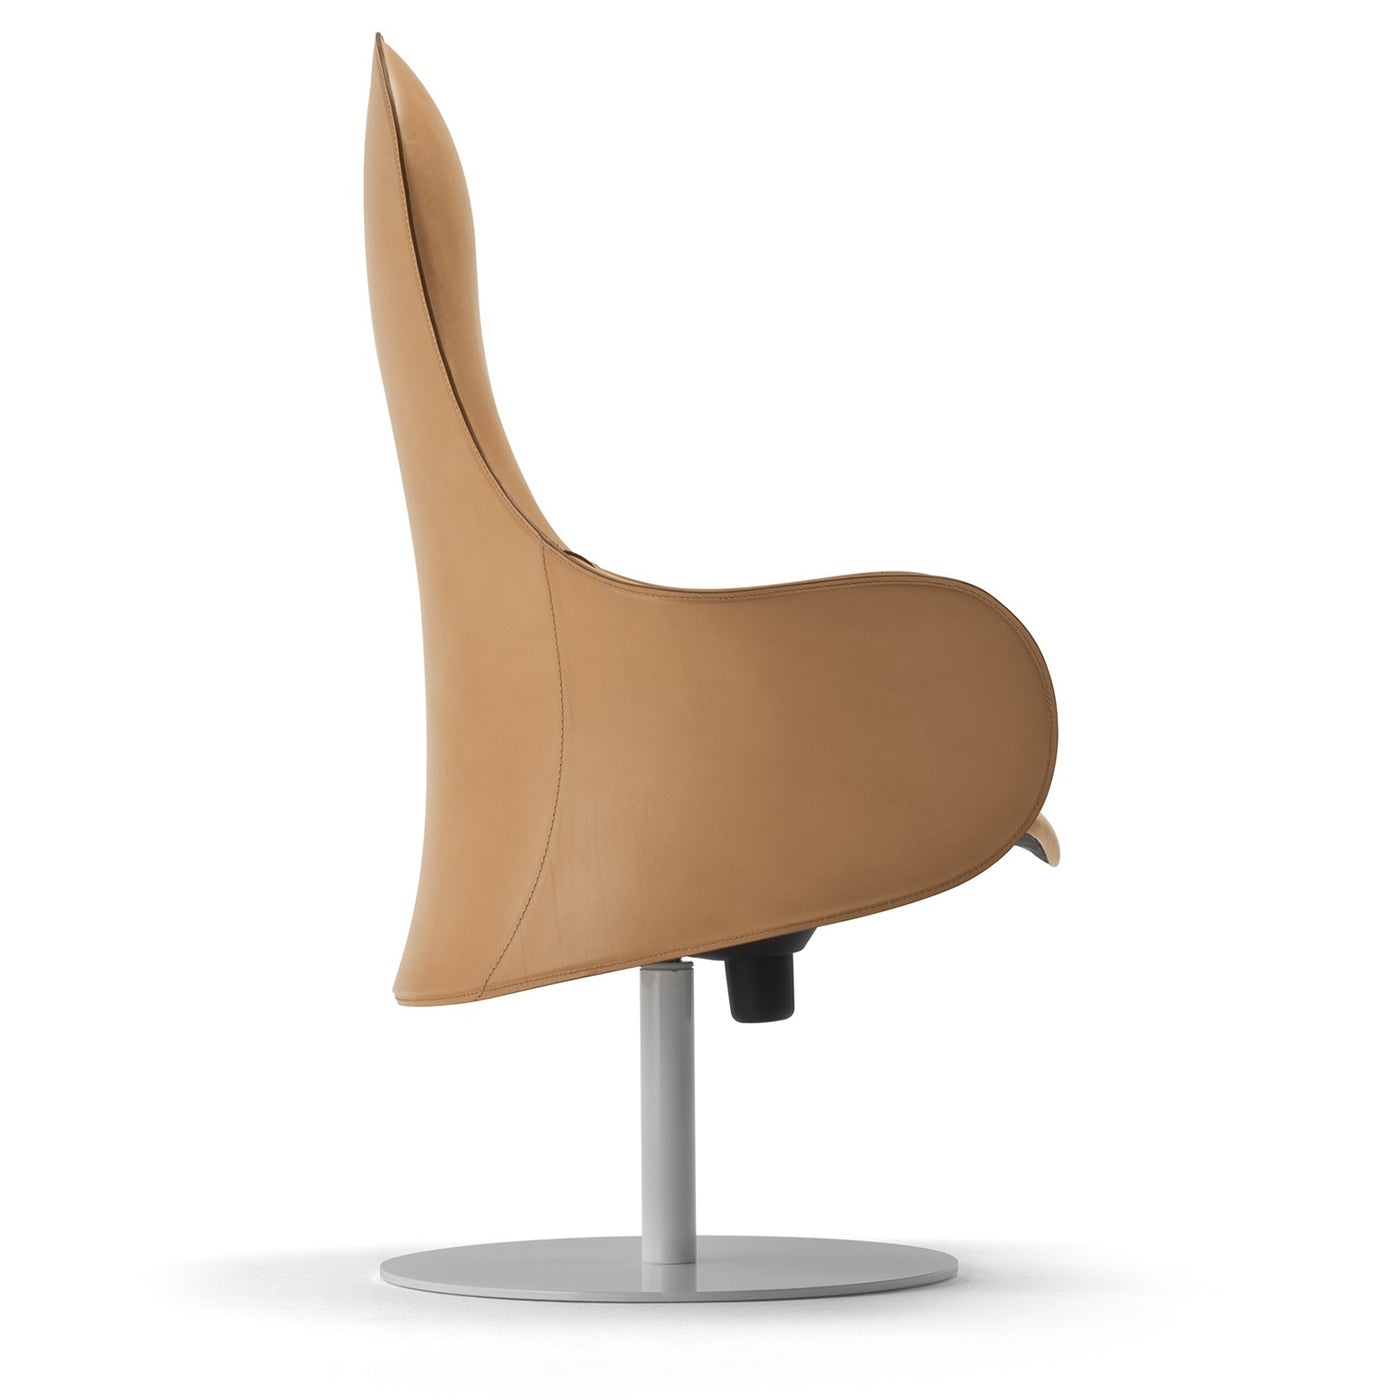 Hipod Fixed Base Chair by Giulio Manzoni - Alternative view 2